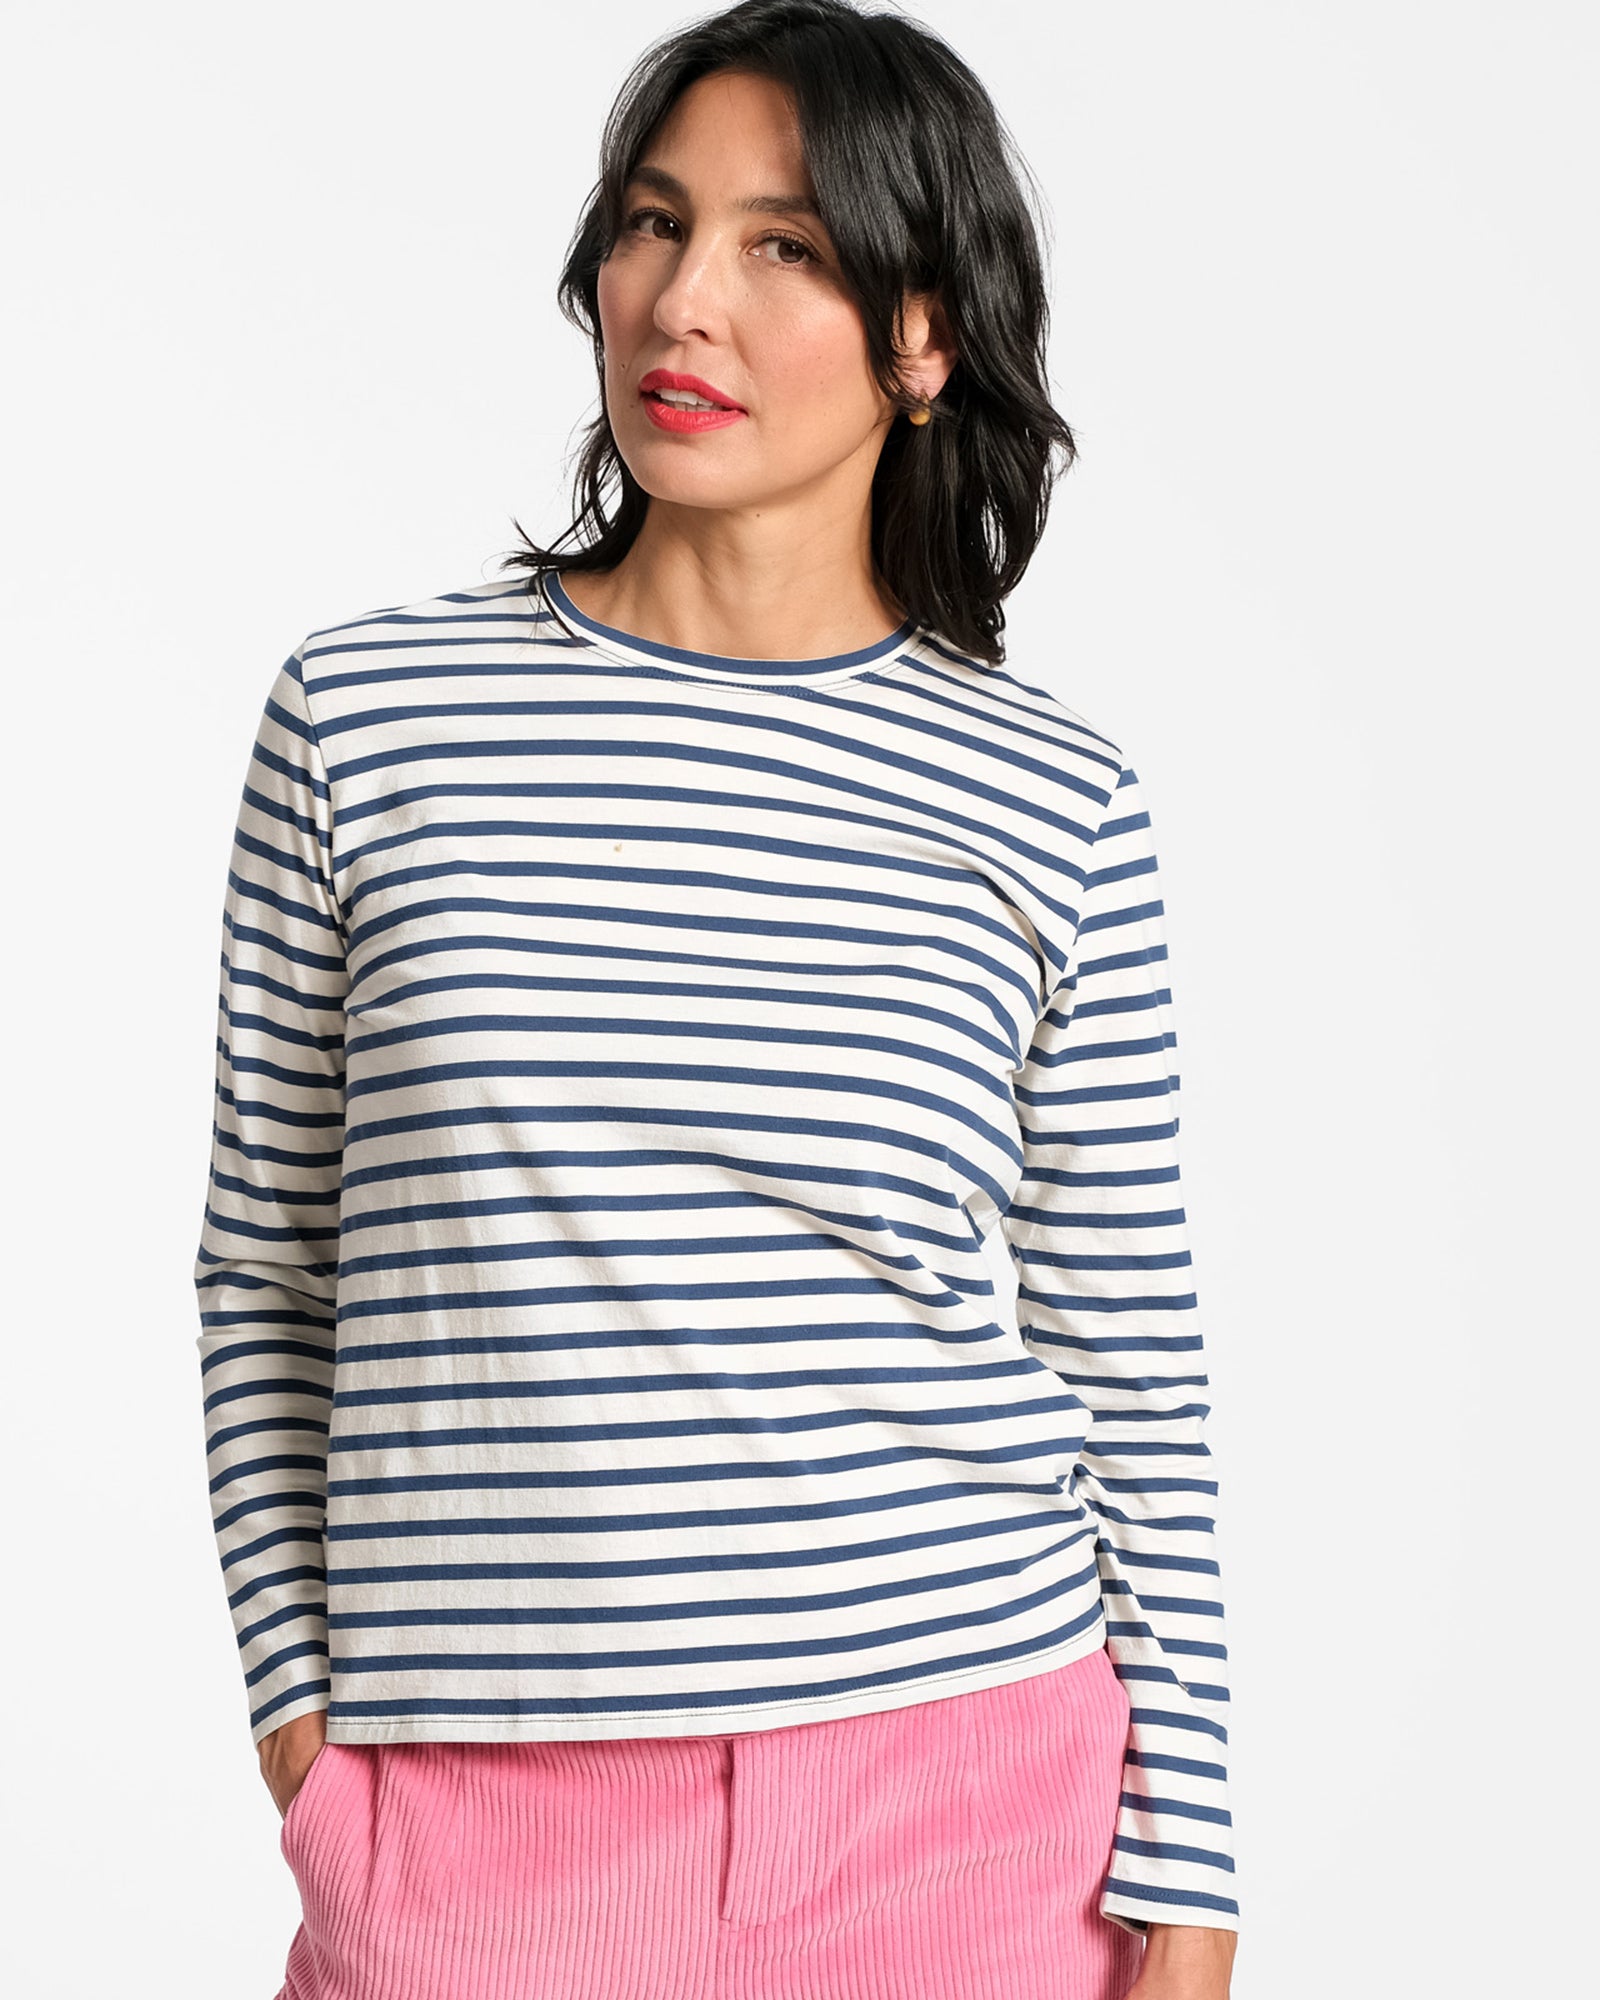 Long Sleeve Striped Tee Shirt Oyster Navy